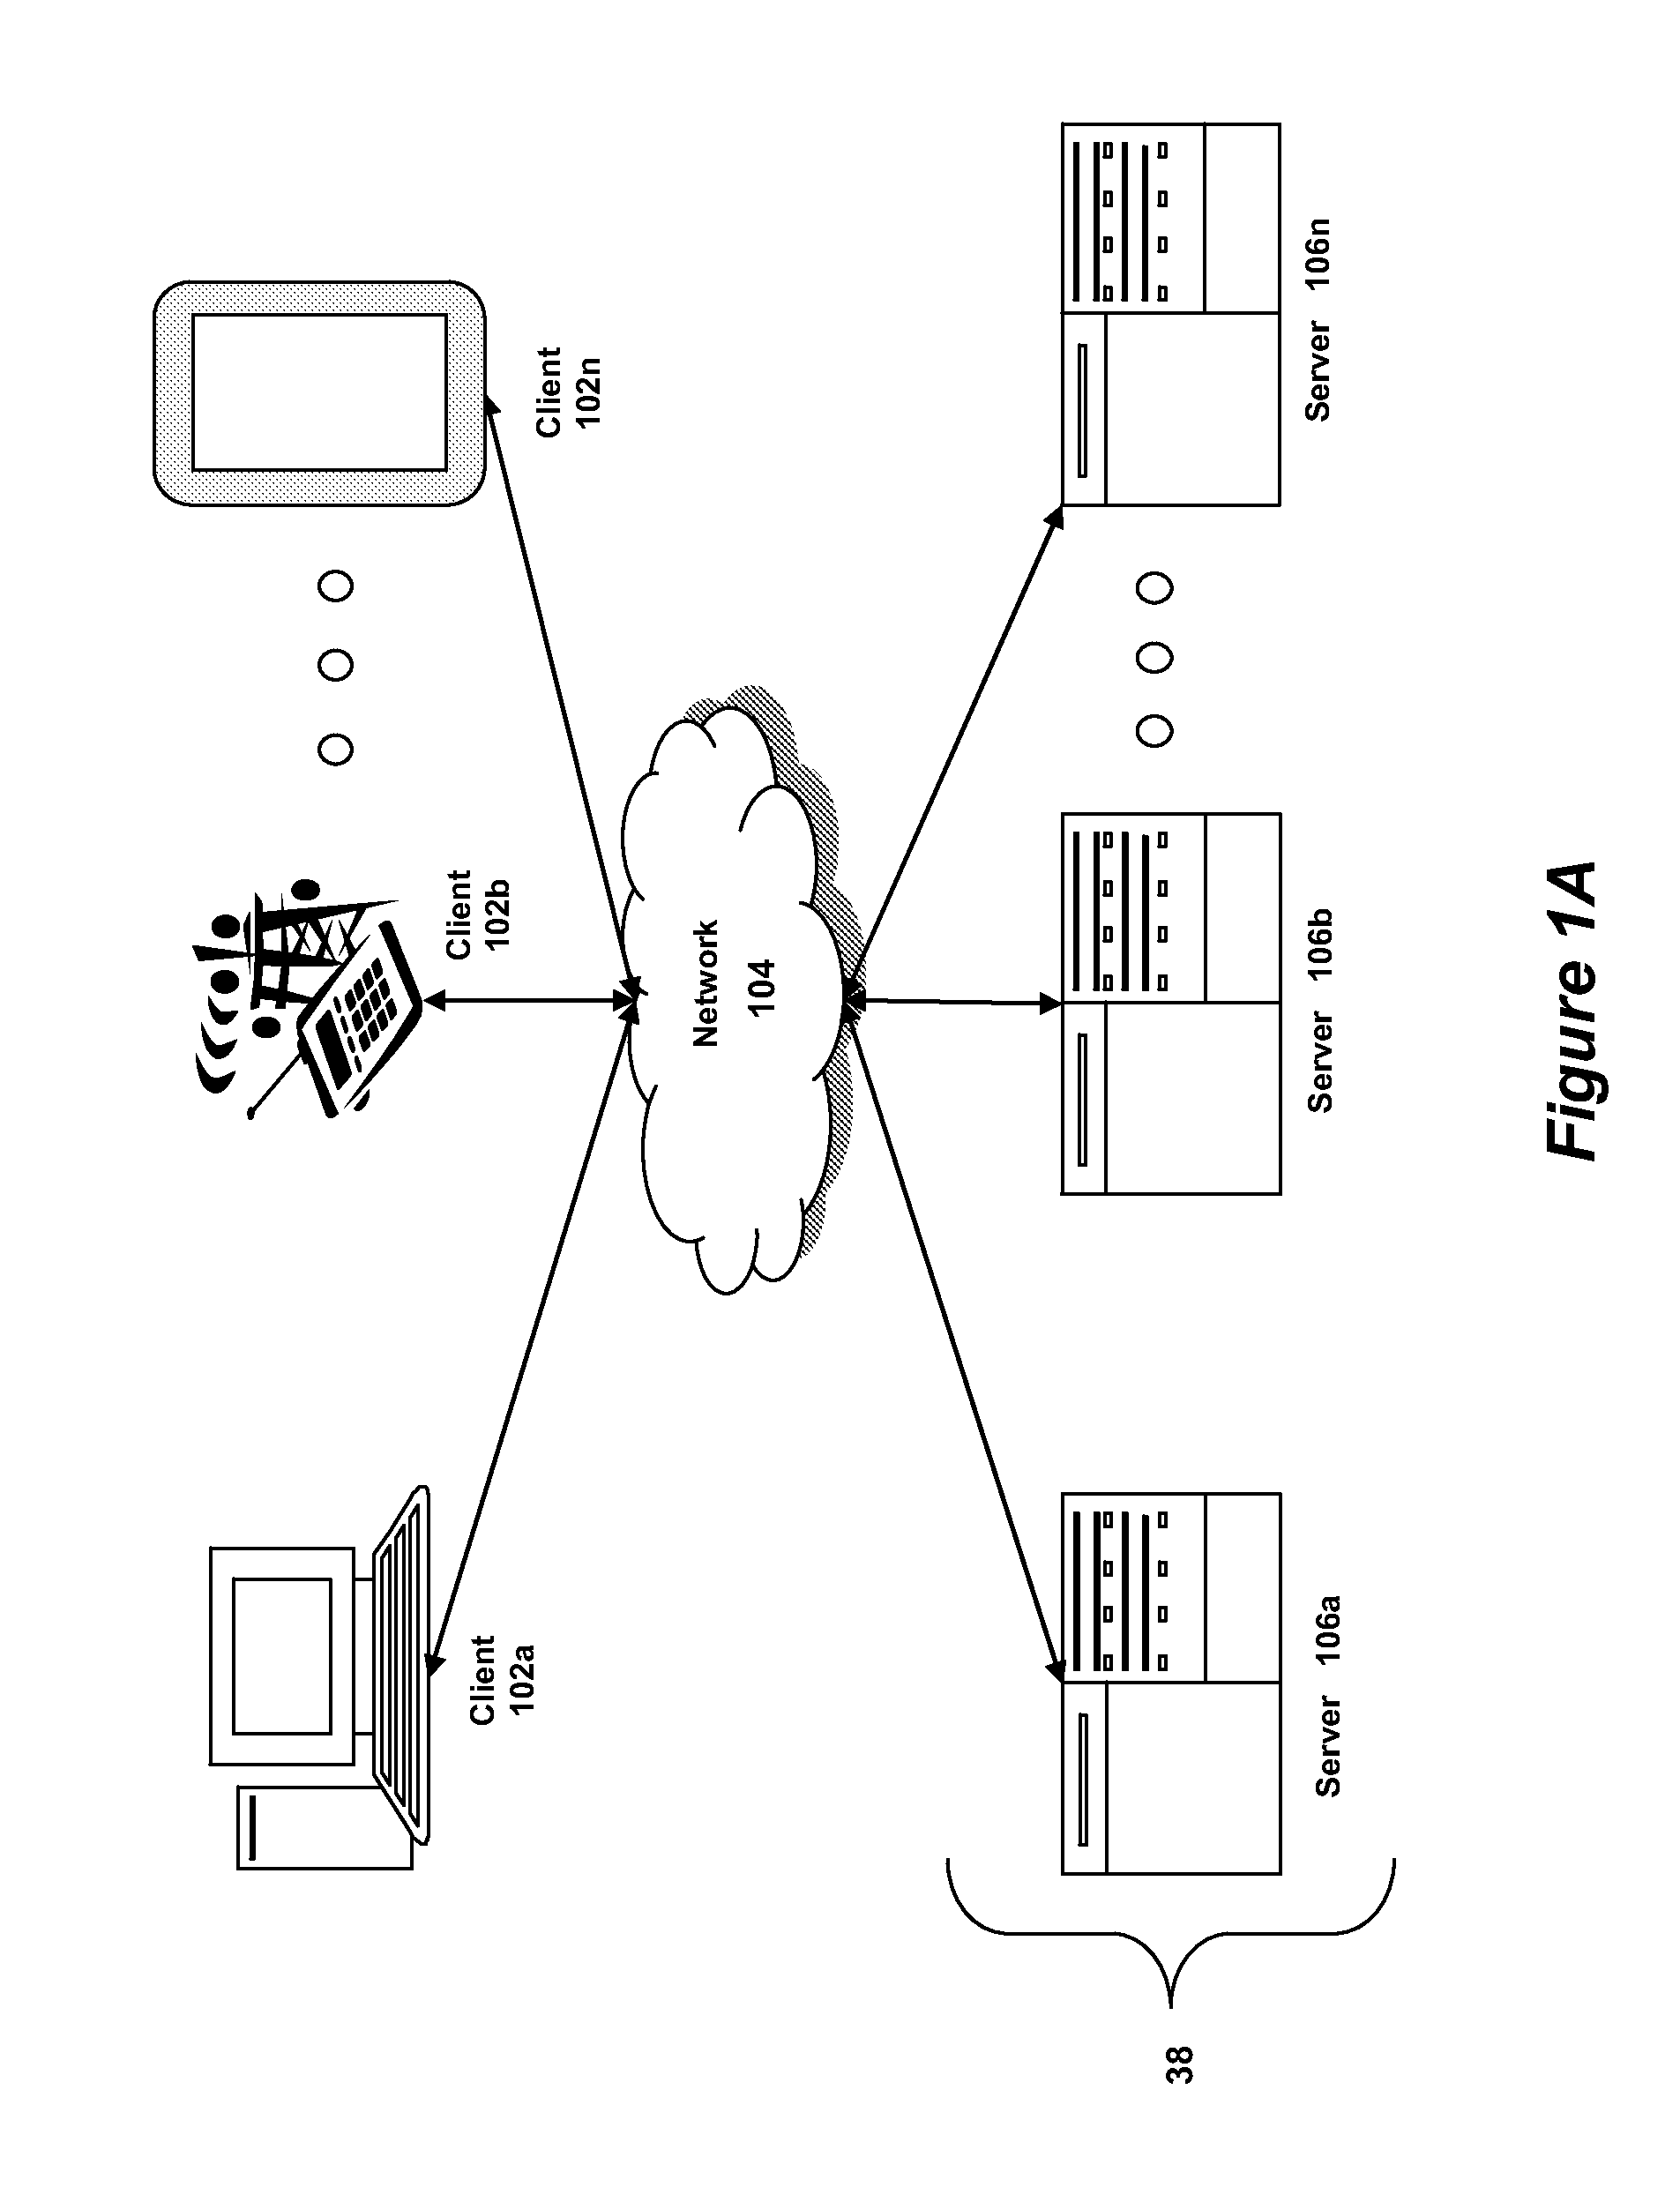 Systems and methods for verification of consumption of product